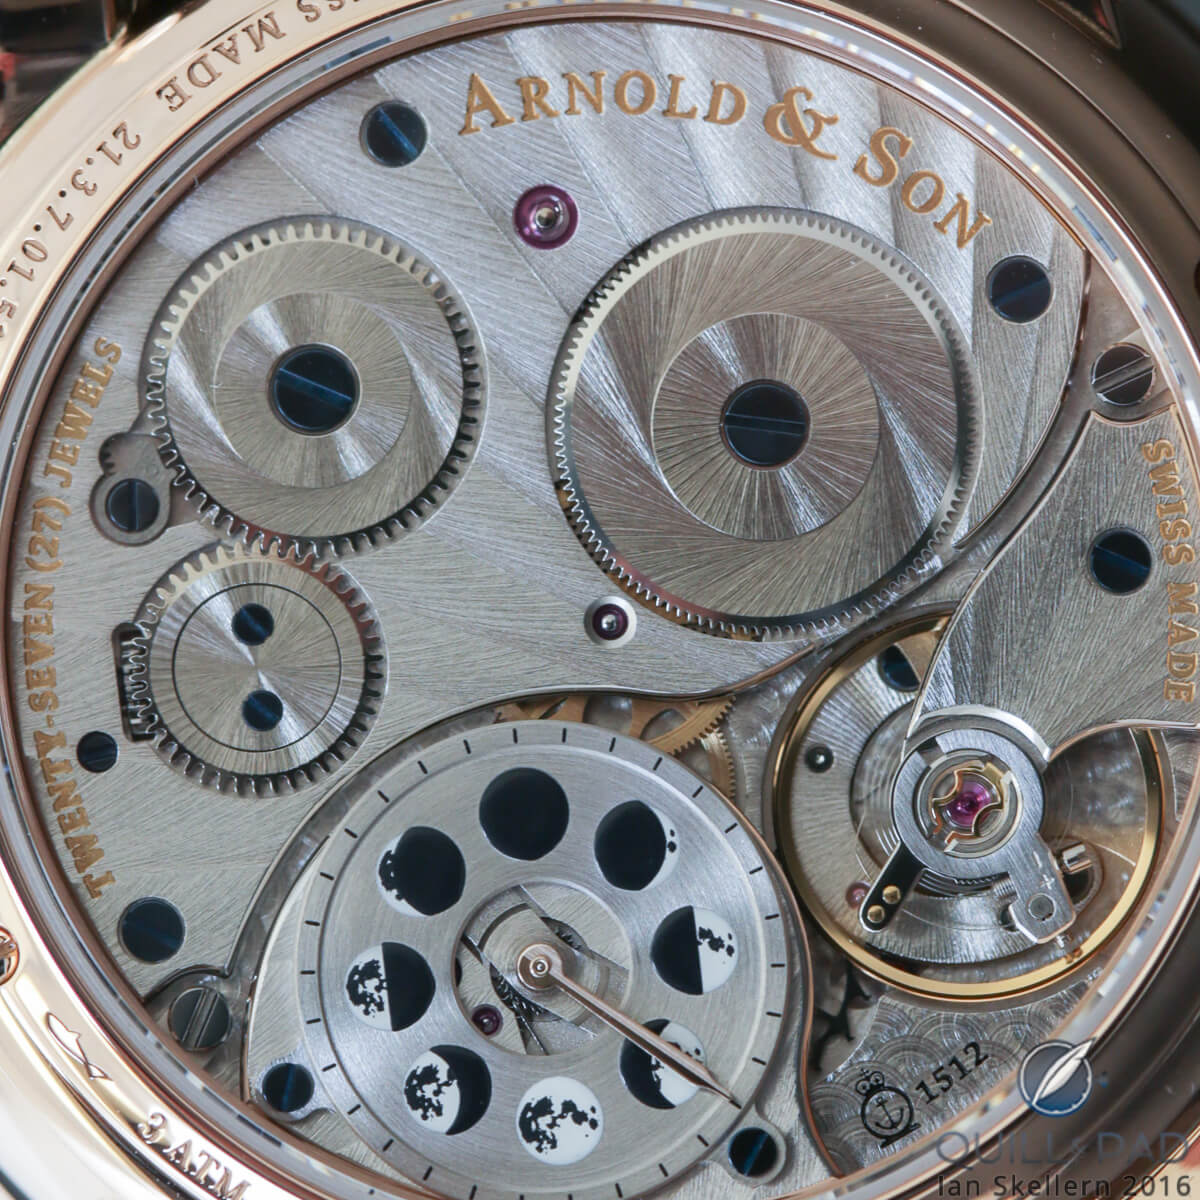 Movement of the Arnold & Son HM Double Hemisphere Perpetual Moon with the accurate moon setting disk st the bottom